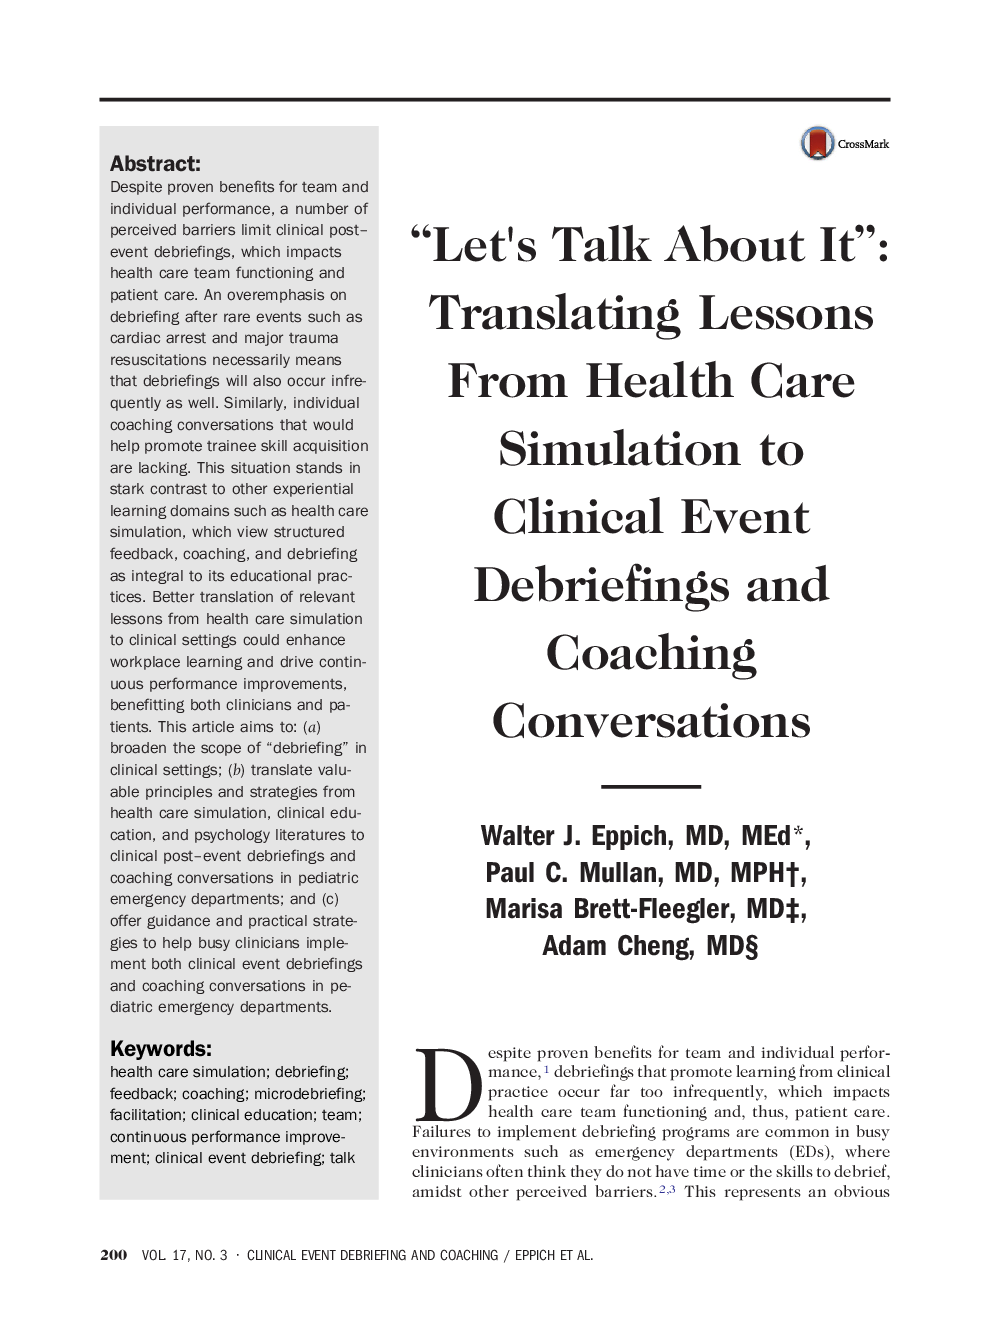 “Let's Talk About It”: Translating Lessons From Health Care Simulation to Clinical Event Debriefings and Coaching Conversations